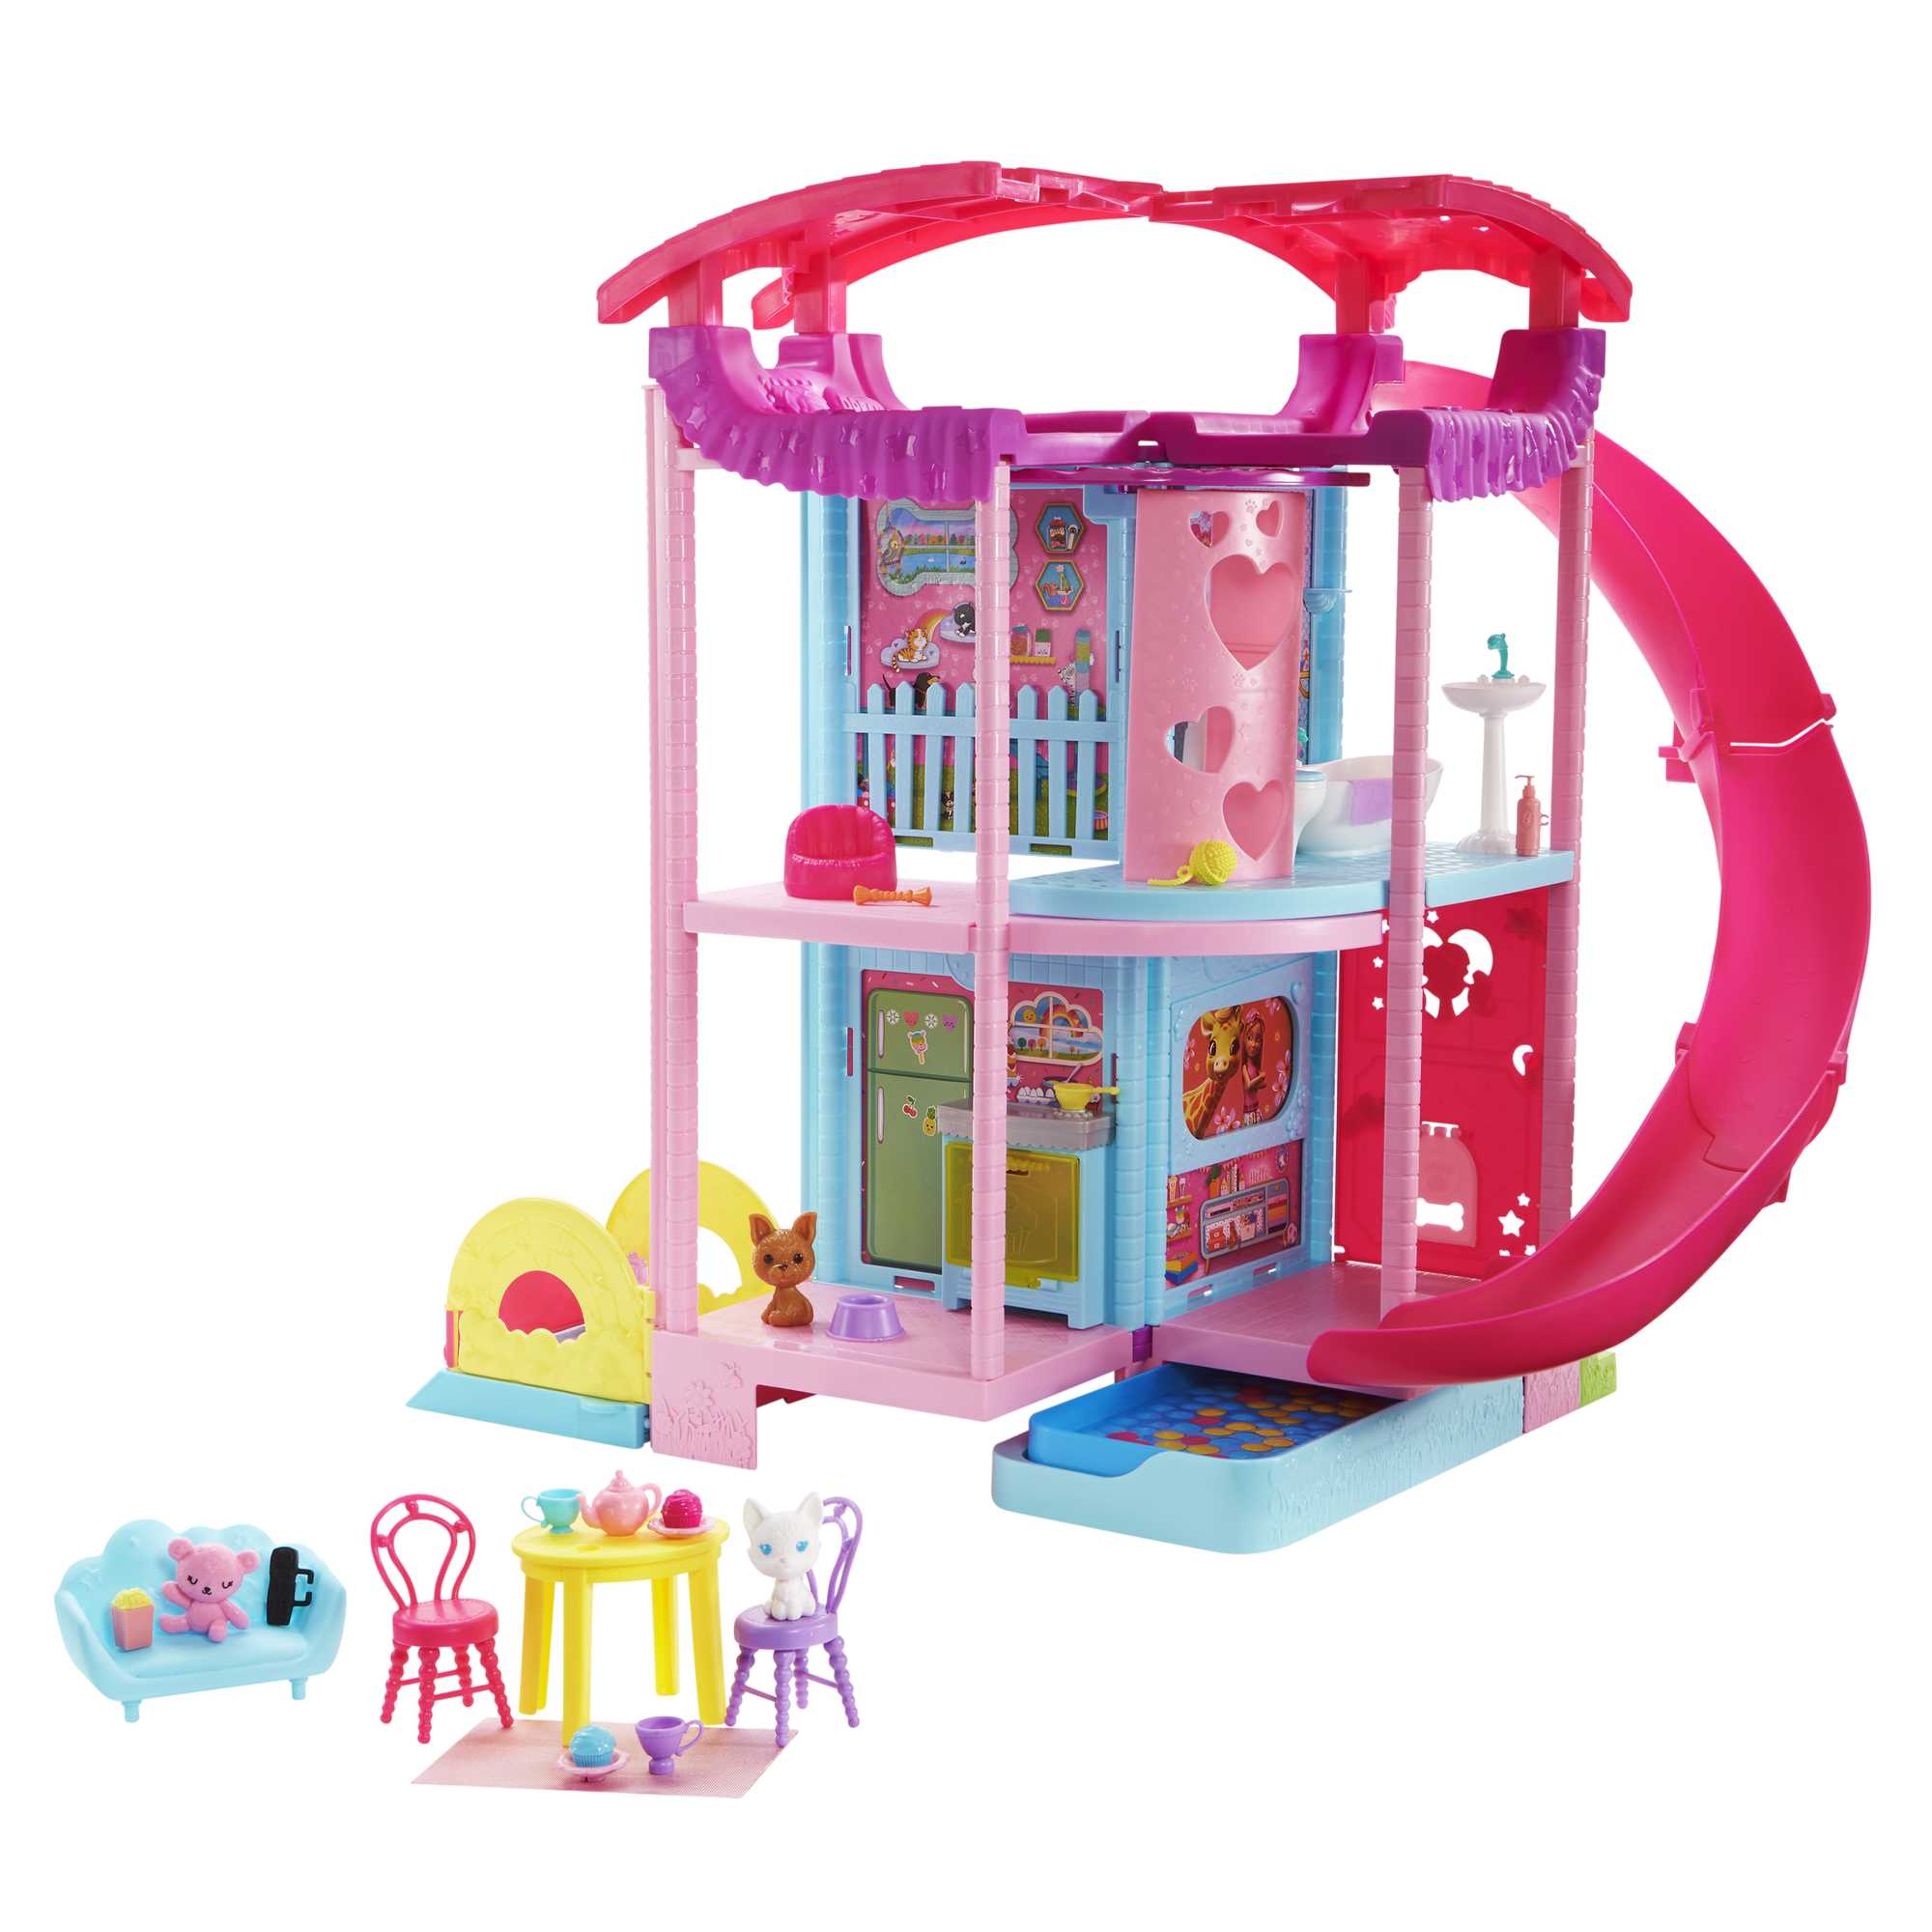 Barbie Chelsea Can Be Toy Store Playset with Small Blonde Doll, Shop  Furniture & 15 Accessories 